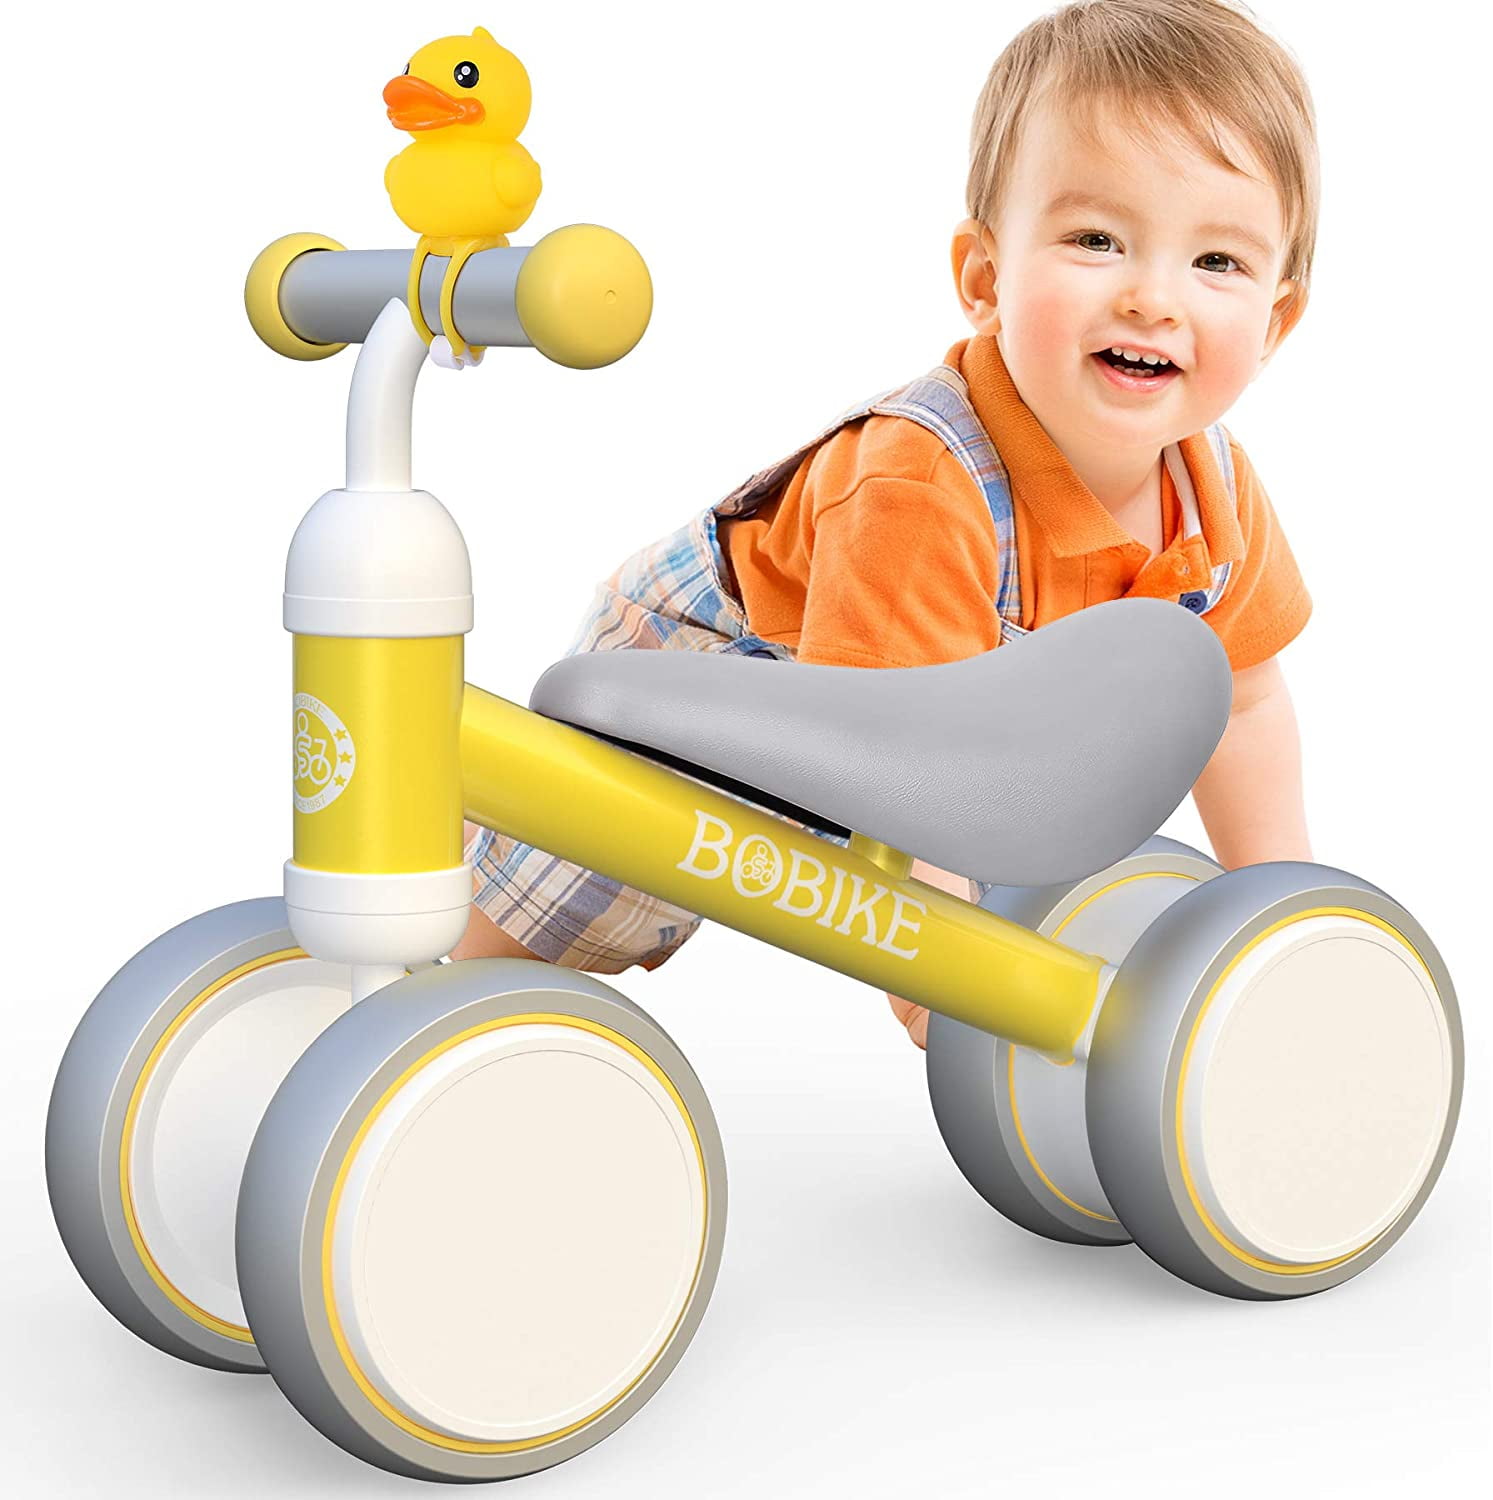 Timy Baby Balance Bike for 1 Year Old Kids Riding Toys for 10-24 Months Toddler 